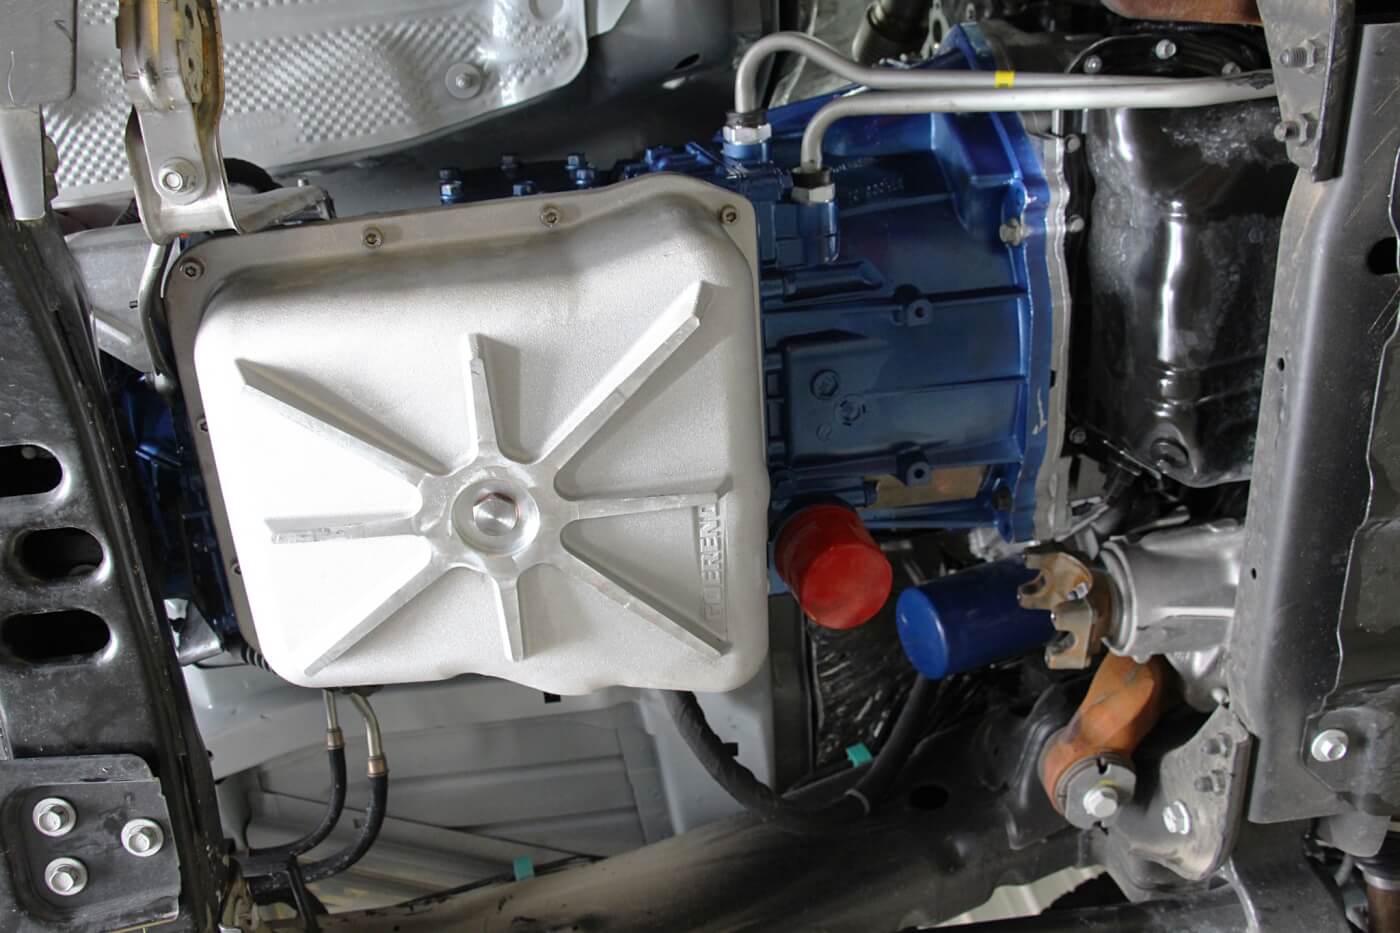 5. The final touch on the Allison transmission was this high capacity pan from Goerend. The lightweight, CNC-machined cast-aluminum pan came with a new internal filter, billet-aluminum filter lock, magnetic drain plug, and holds 3 quarts of additional ATF over stock.